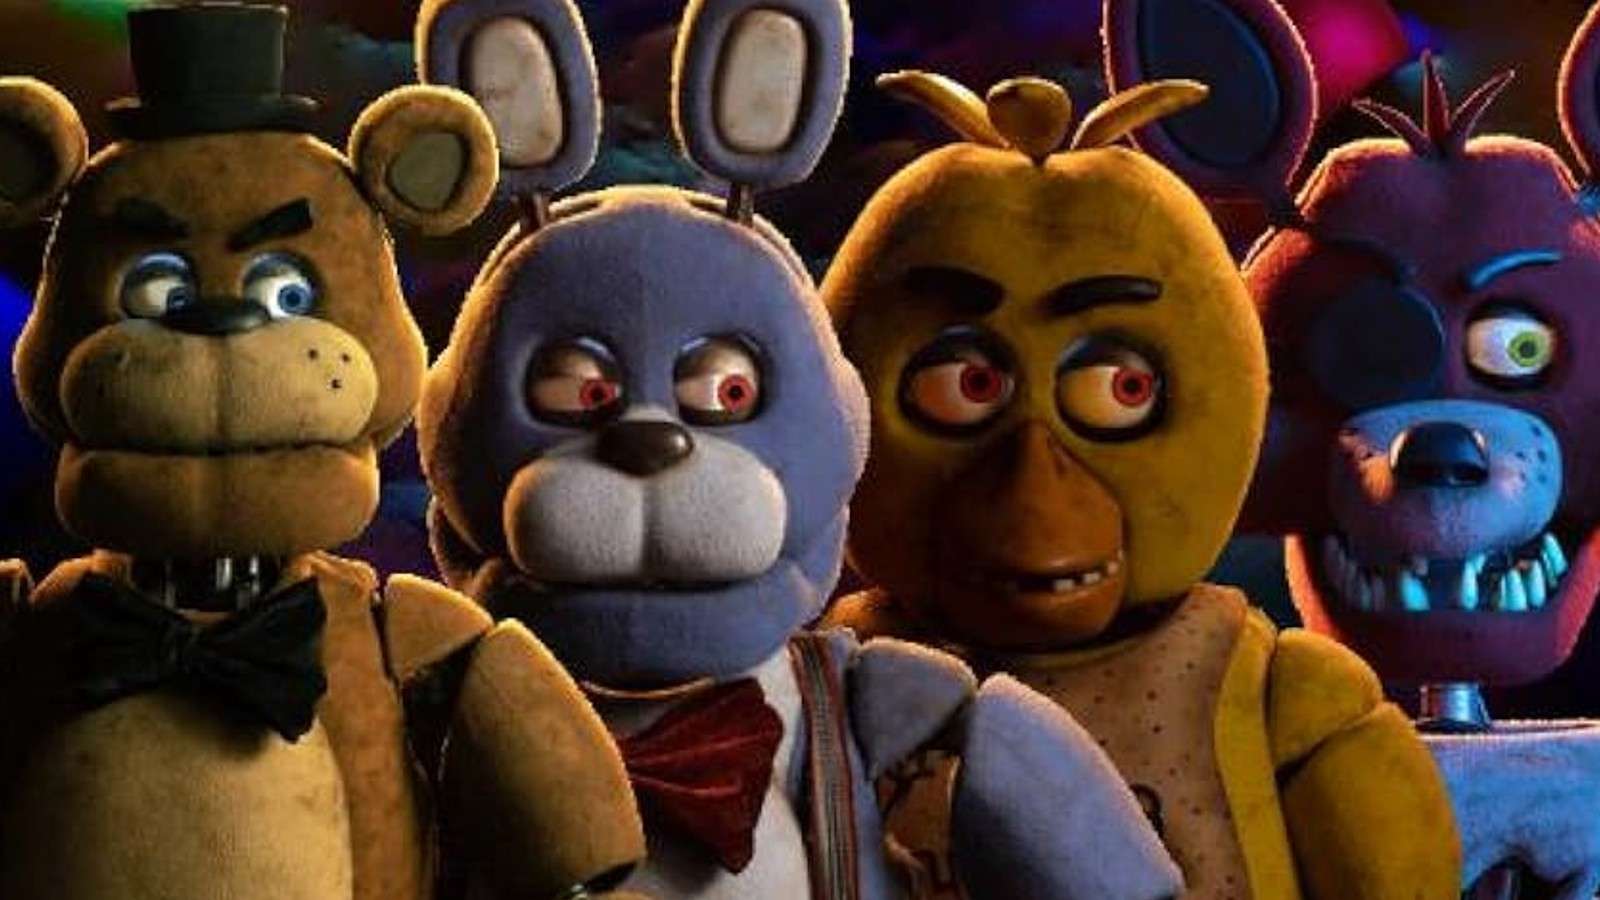 The villains of Five Nights at Freddy's